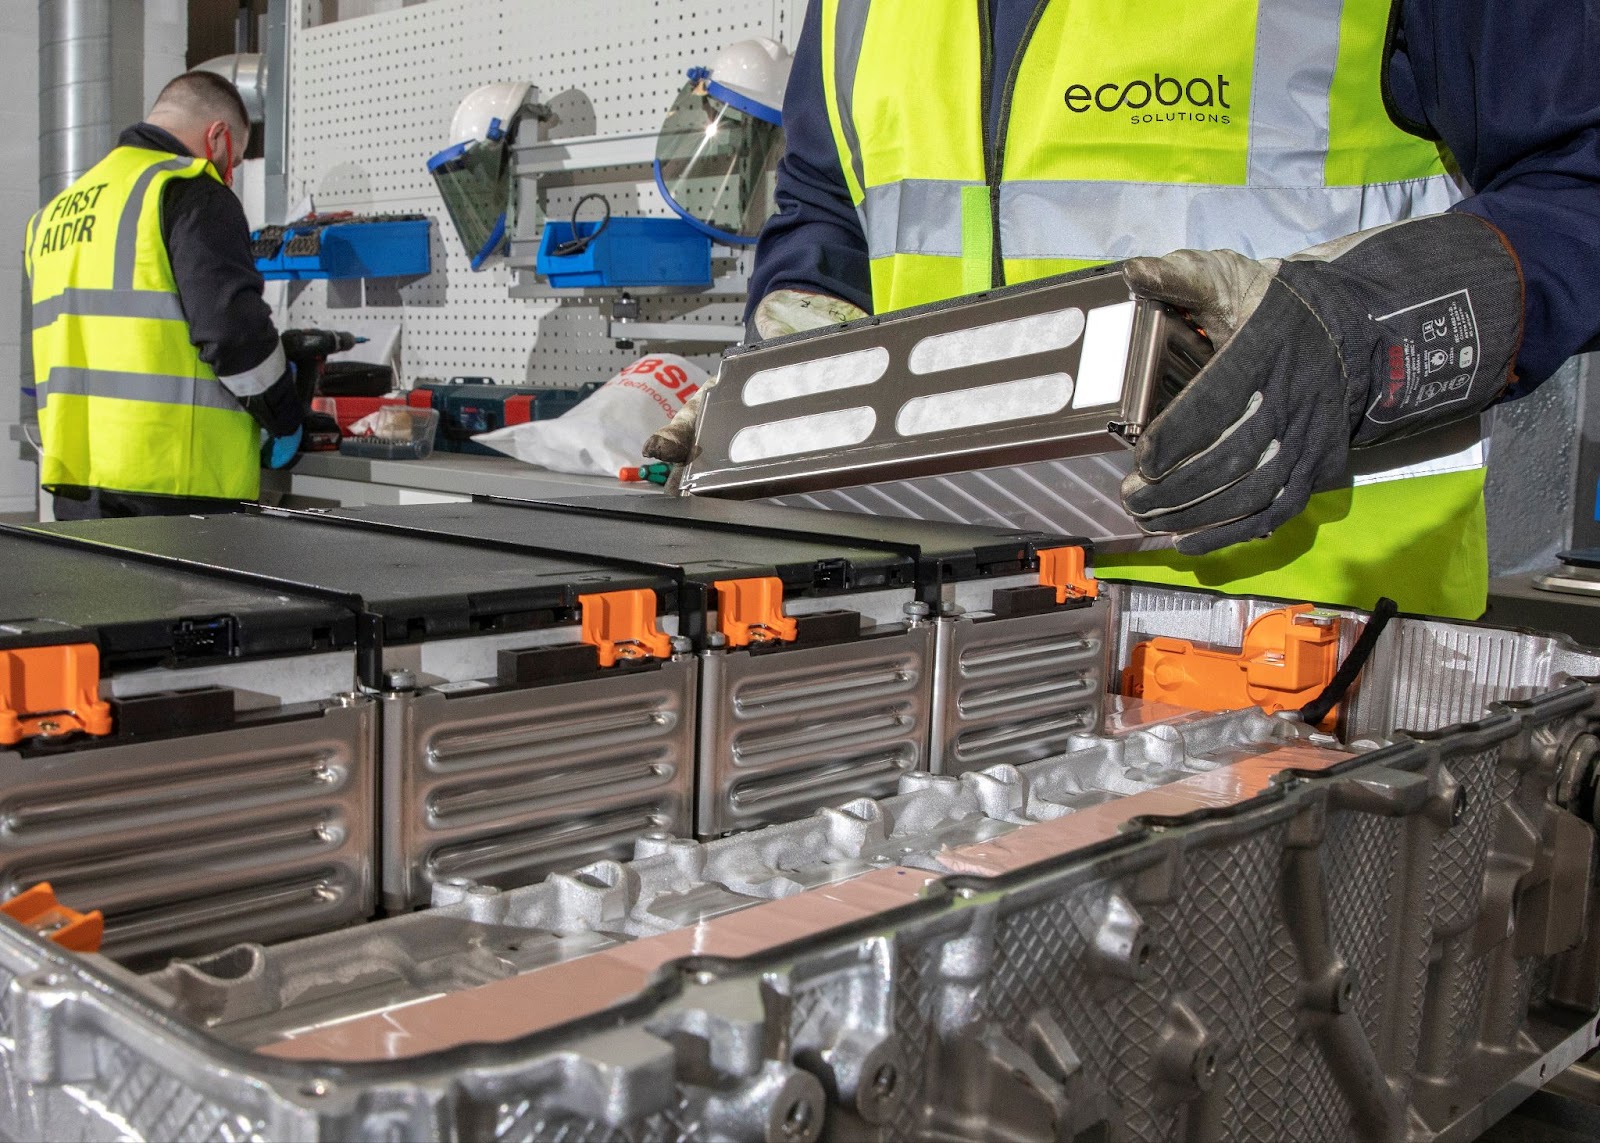 Ecobat provides a range of end-of-life services for old lead and lithium-ion batteries. Image used courtesy of Tevva/Ecobat